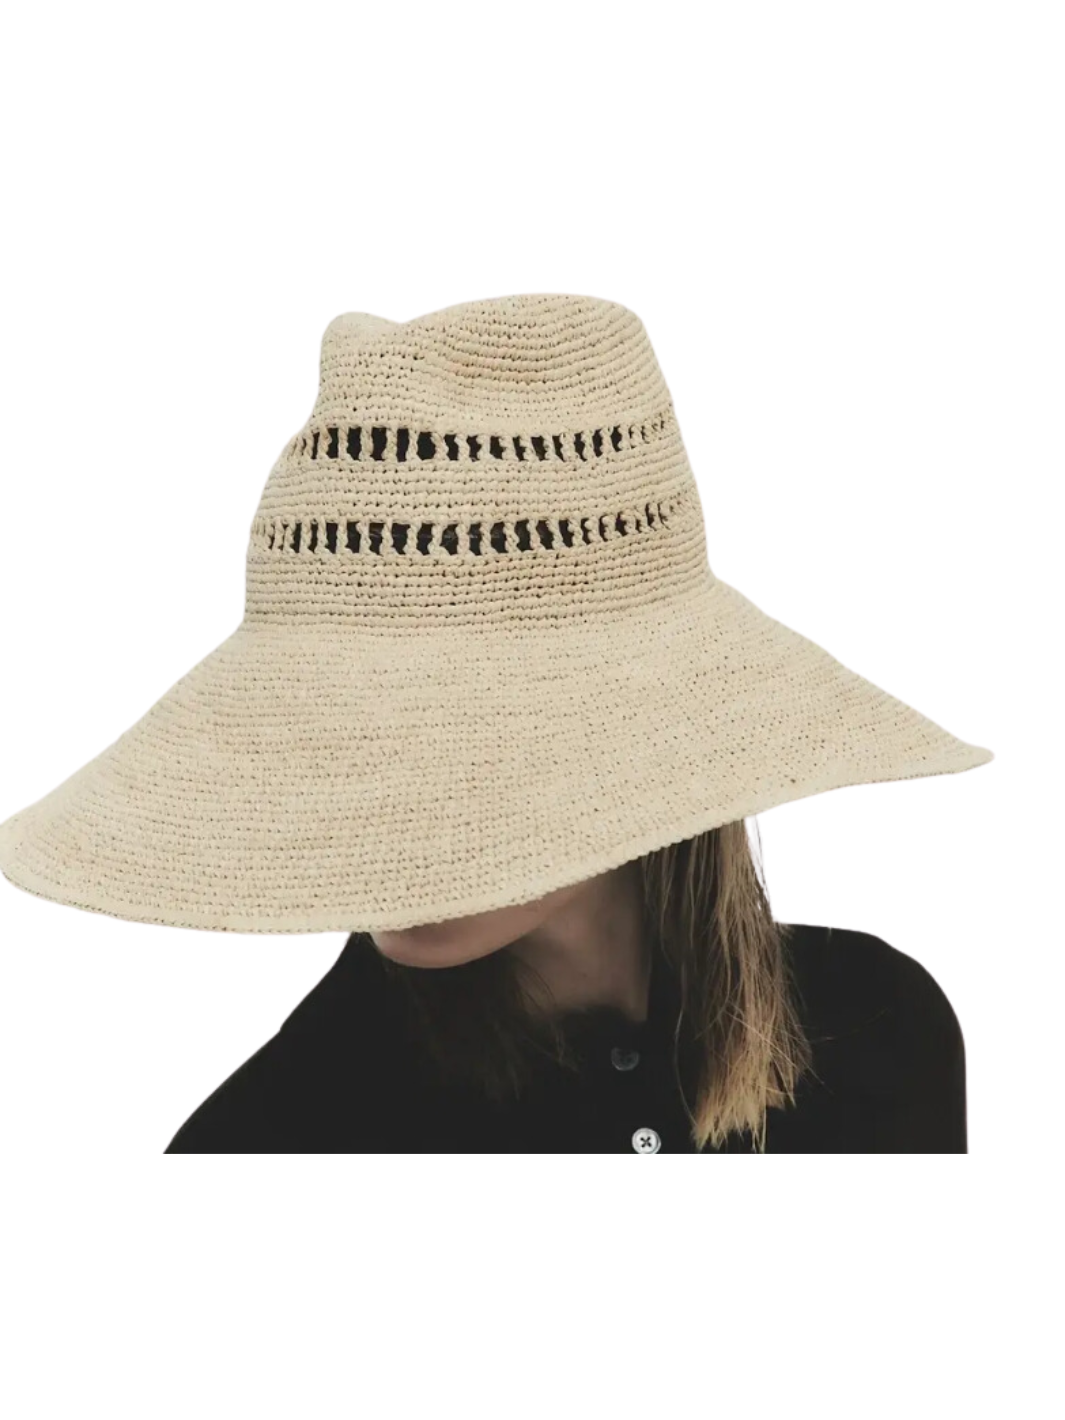 HARLOW HAT IN NATURAL - Romi Boutique